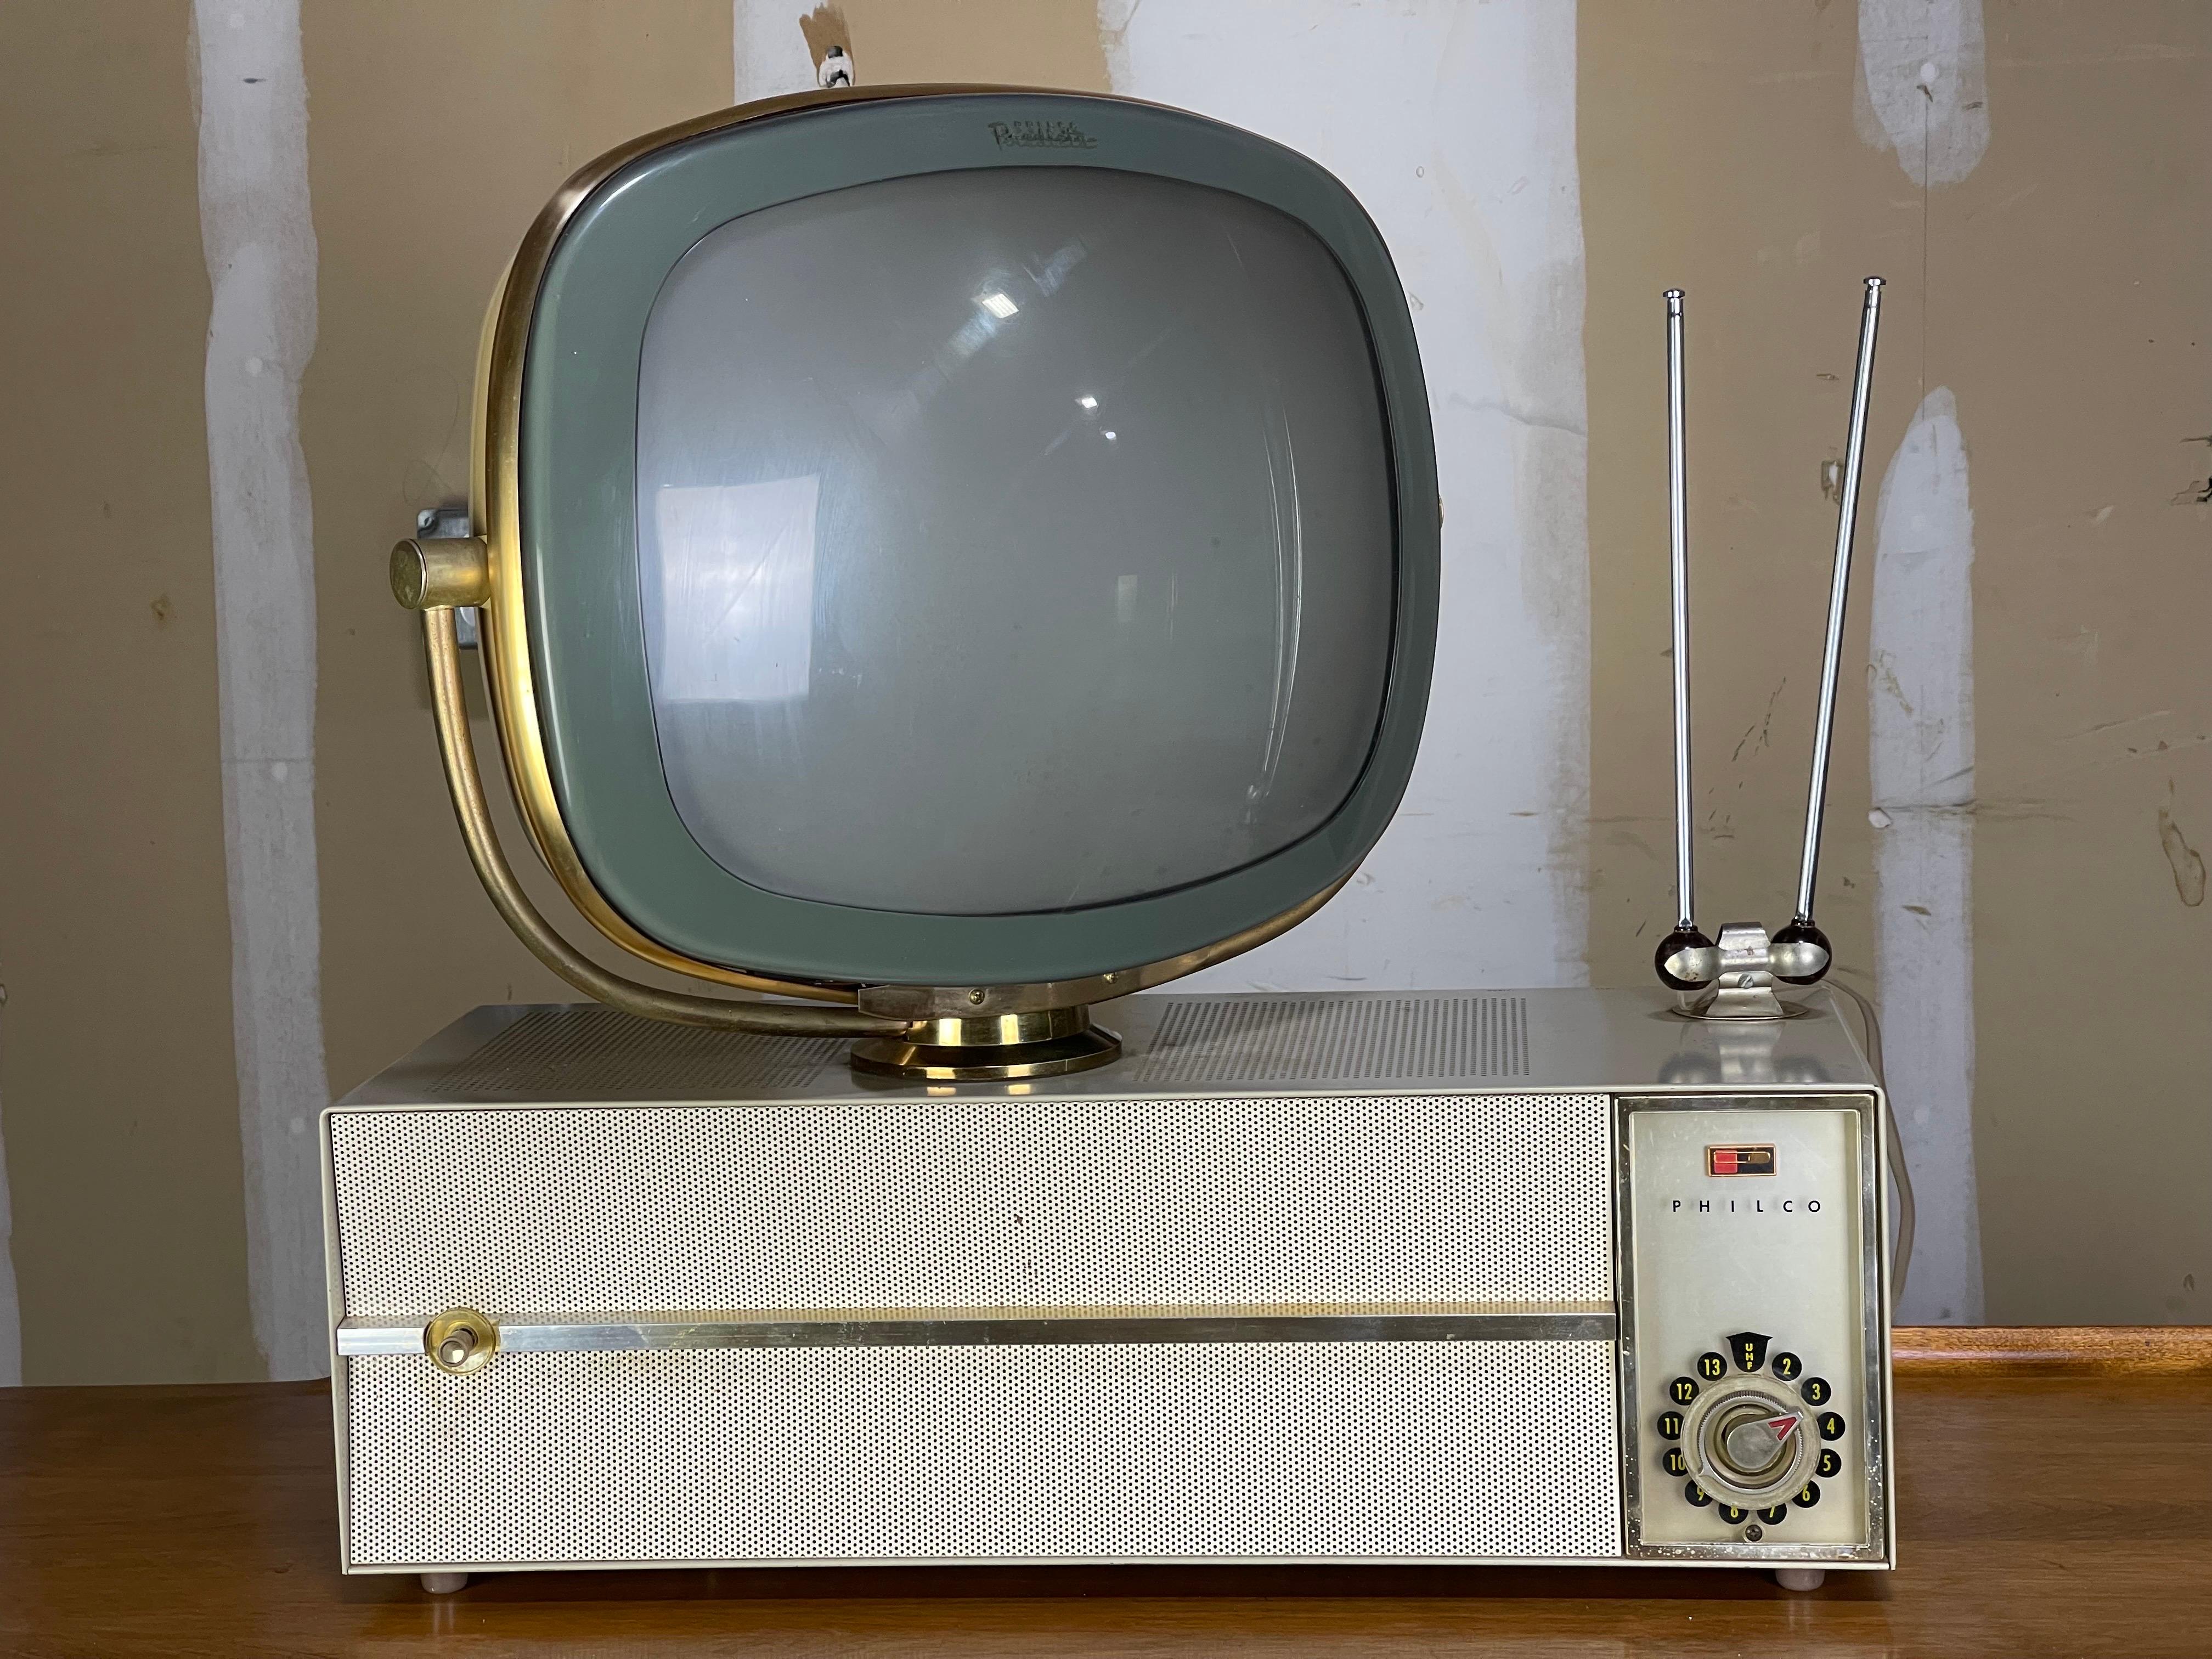 1950's Philco Predicta Television. The plug has been cut off - so I am not sure if it works. Used as a prop or decor.